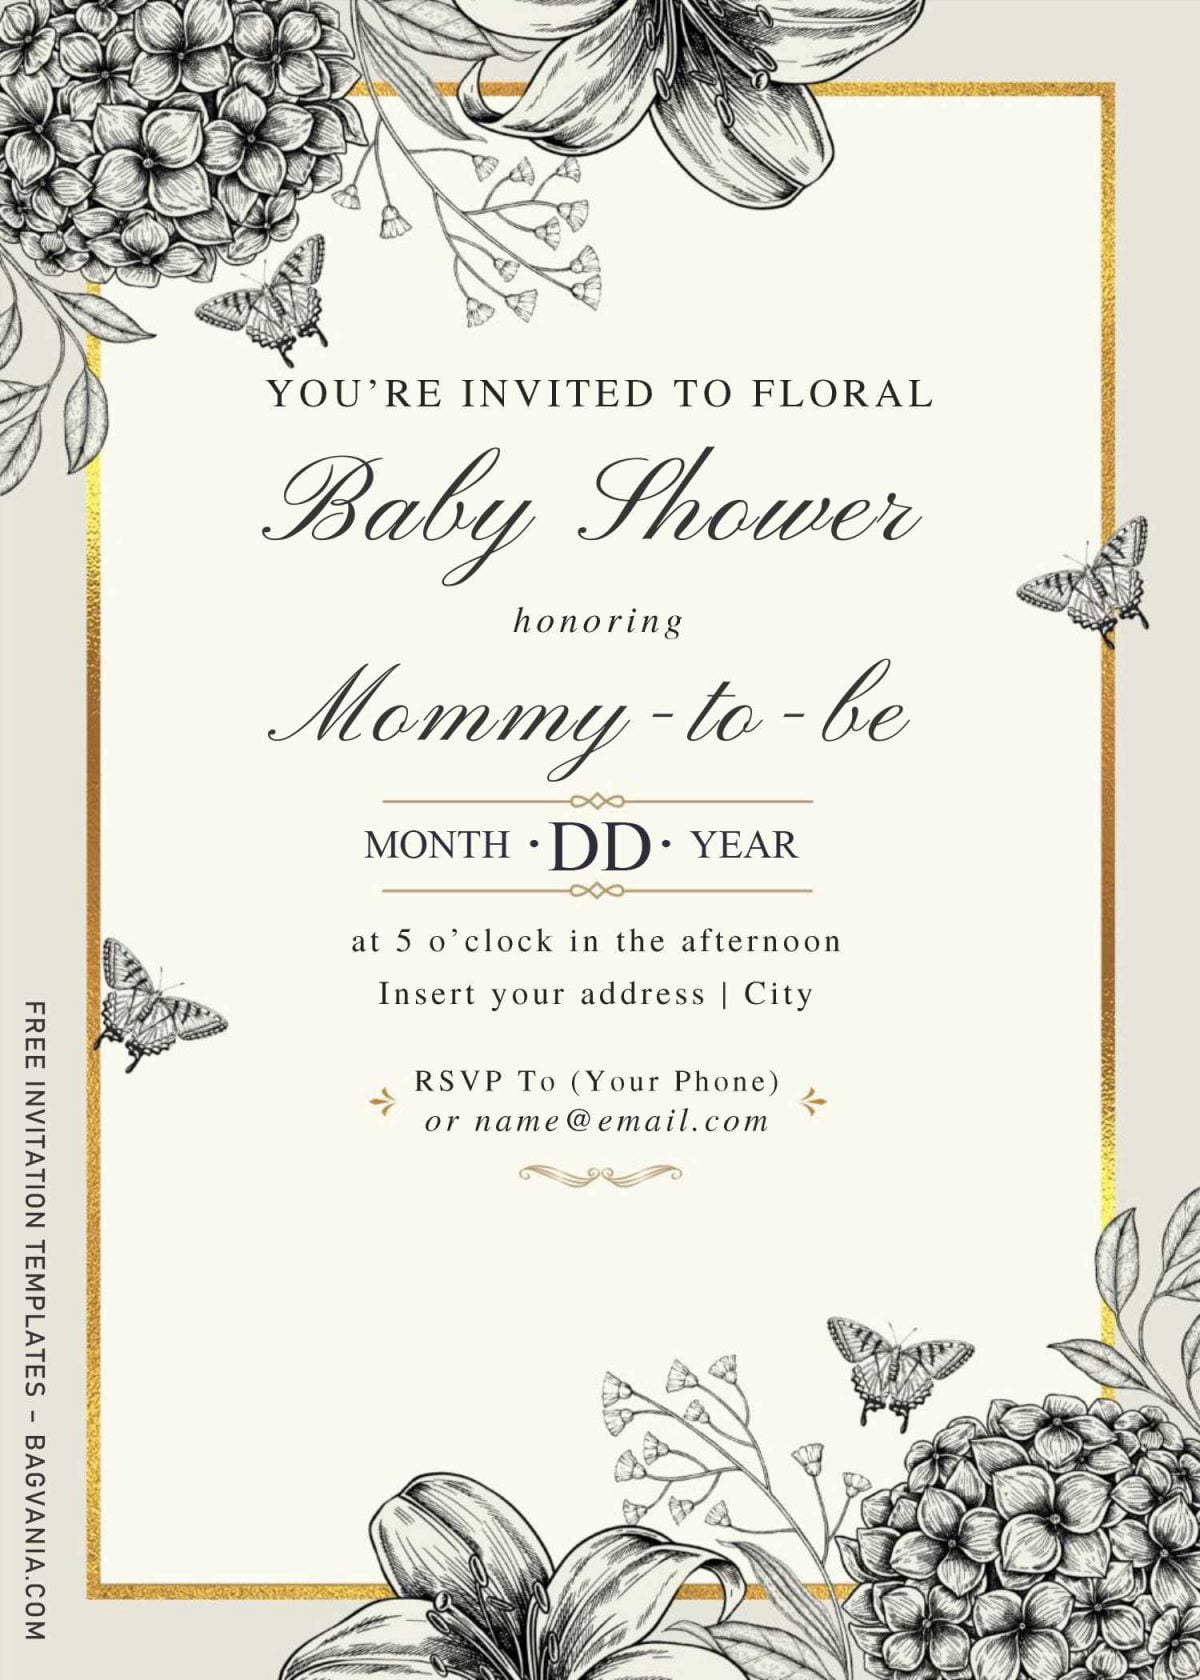 Free Hand Drawn Vintage Floral Wedding Invitation Templates For Word and has metallic gold textured frame border